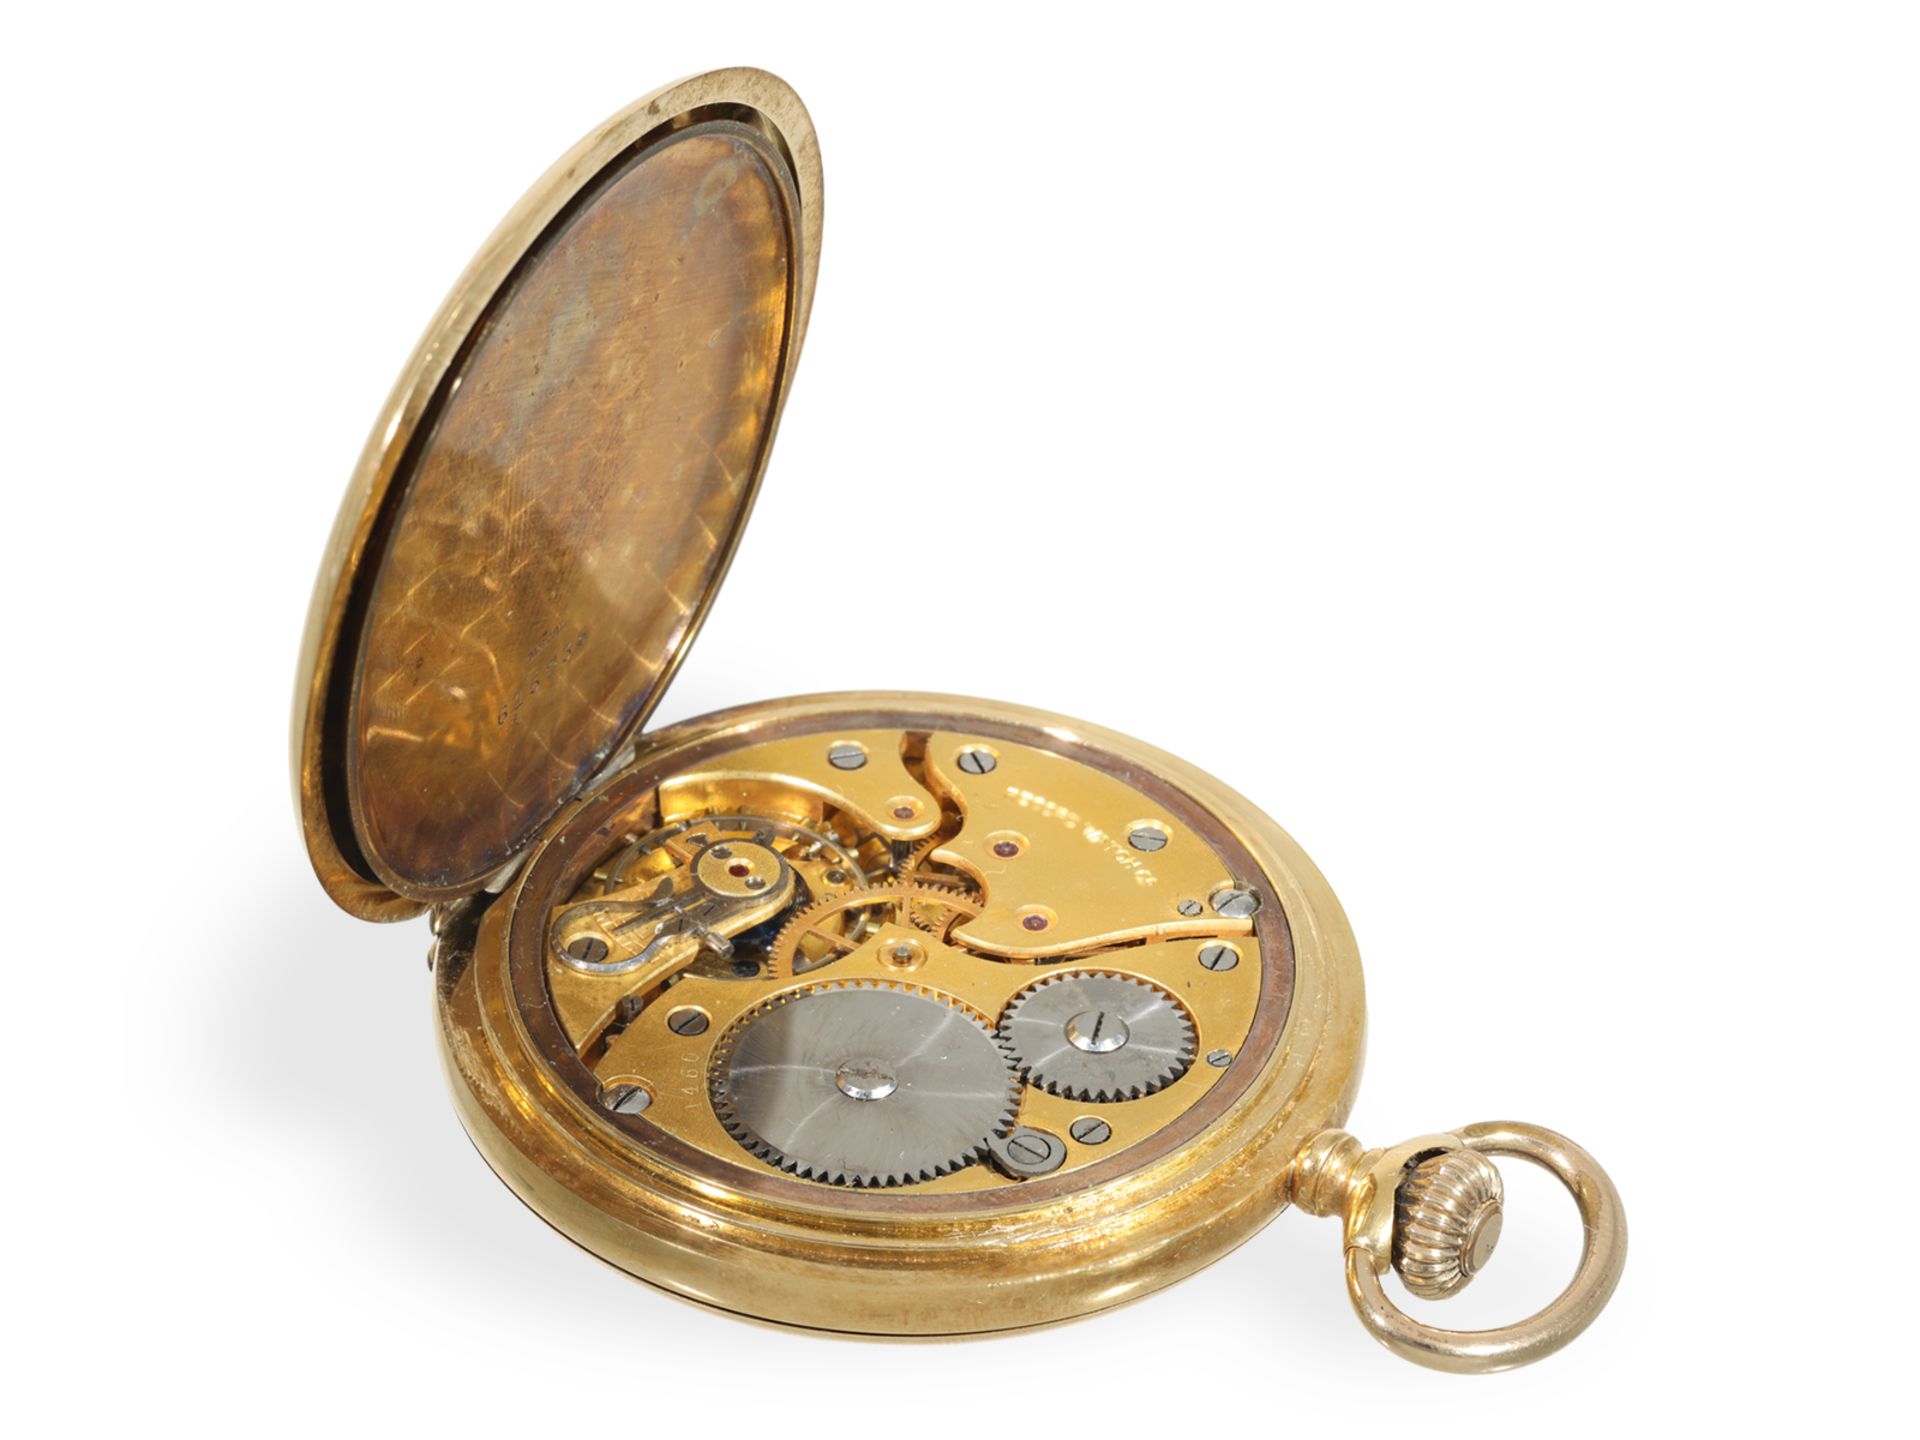 Pocket watch: fine gold hunting case watch with precision movement and gold watch chain, Record Watc - Image 4 of 8